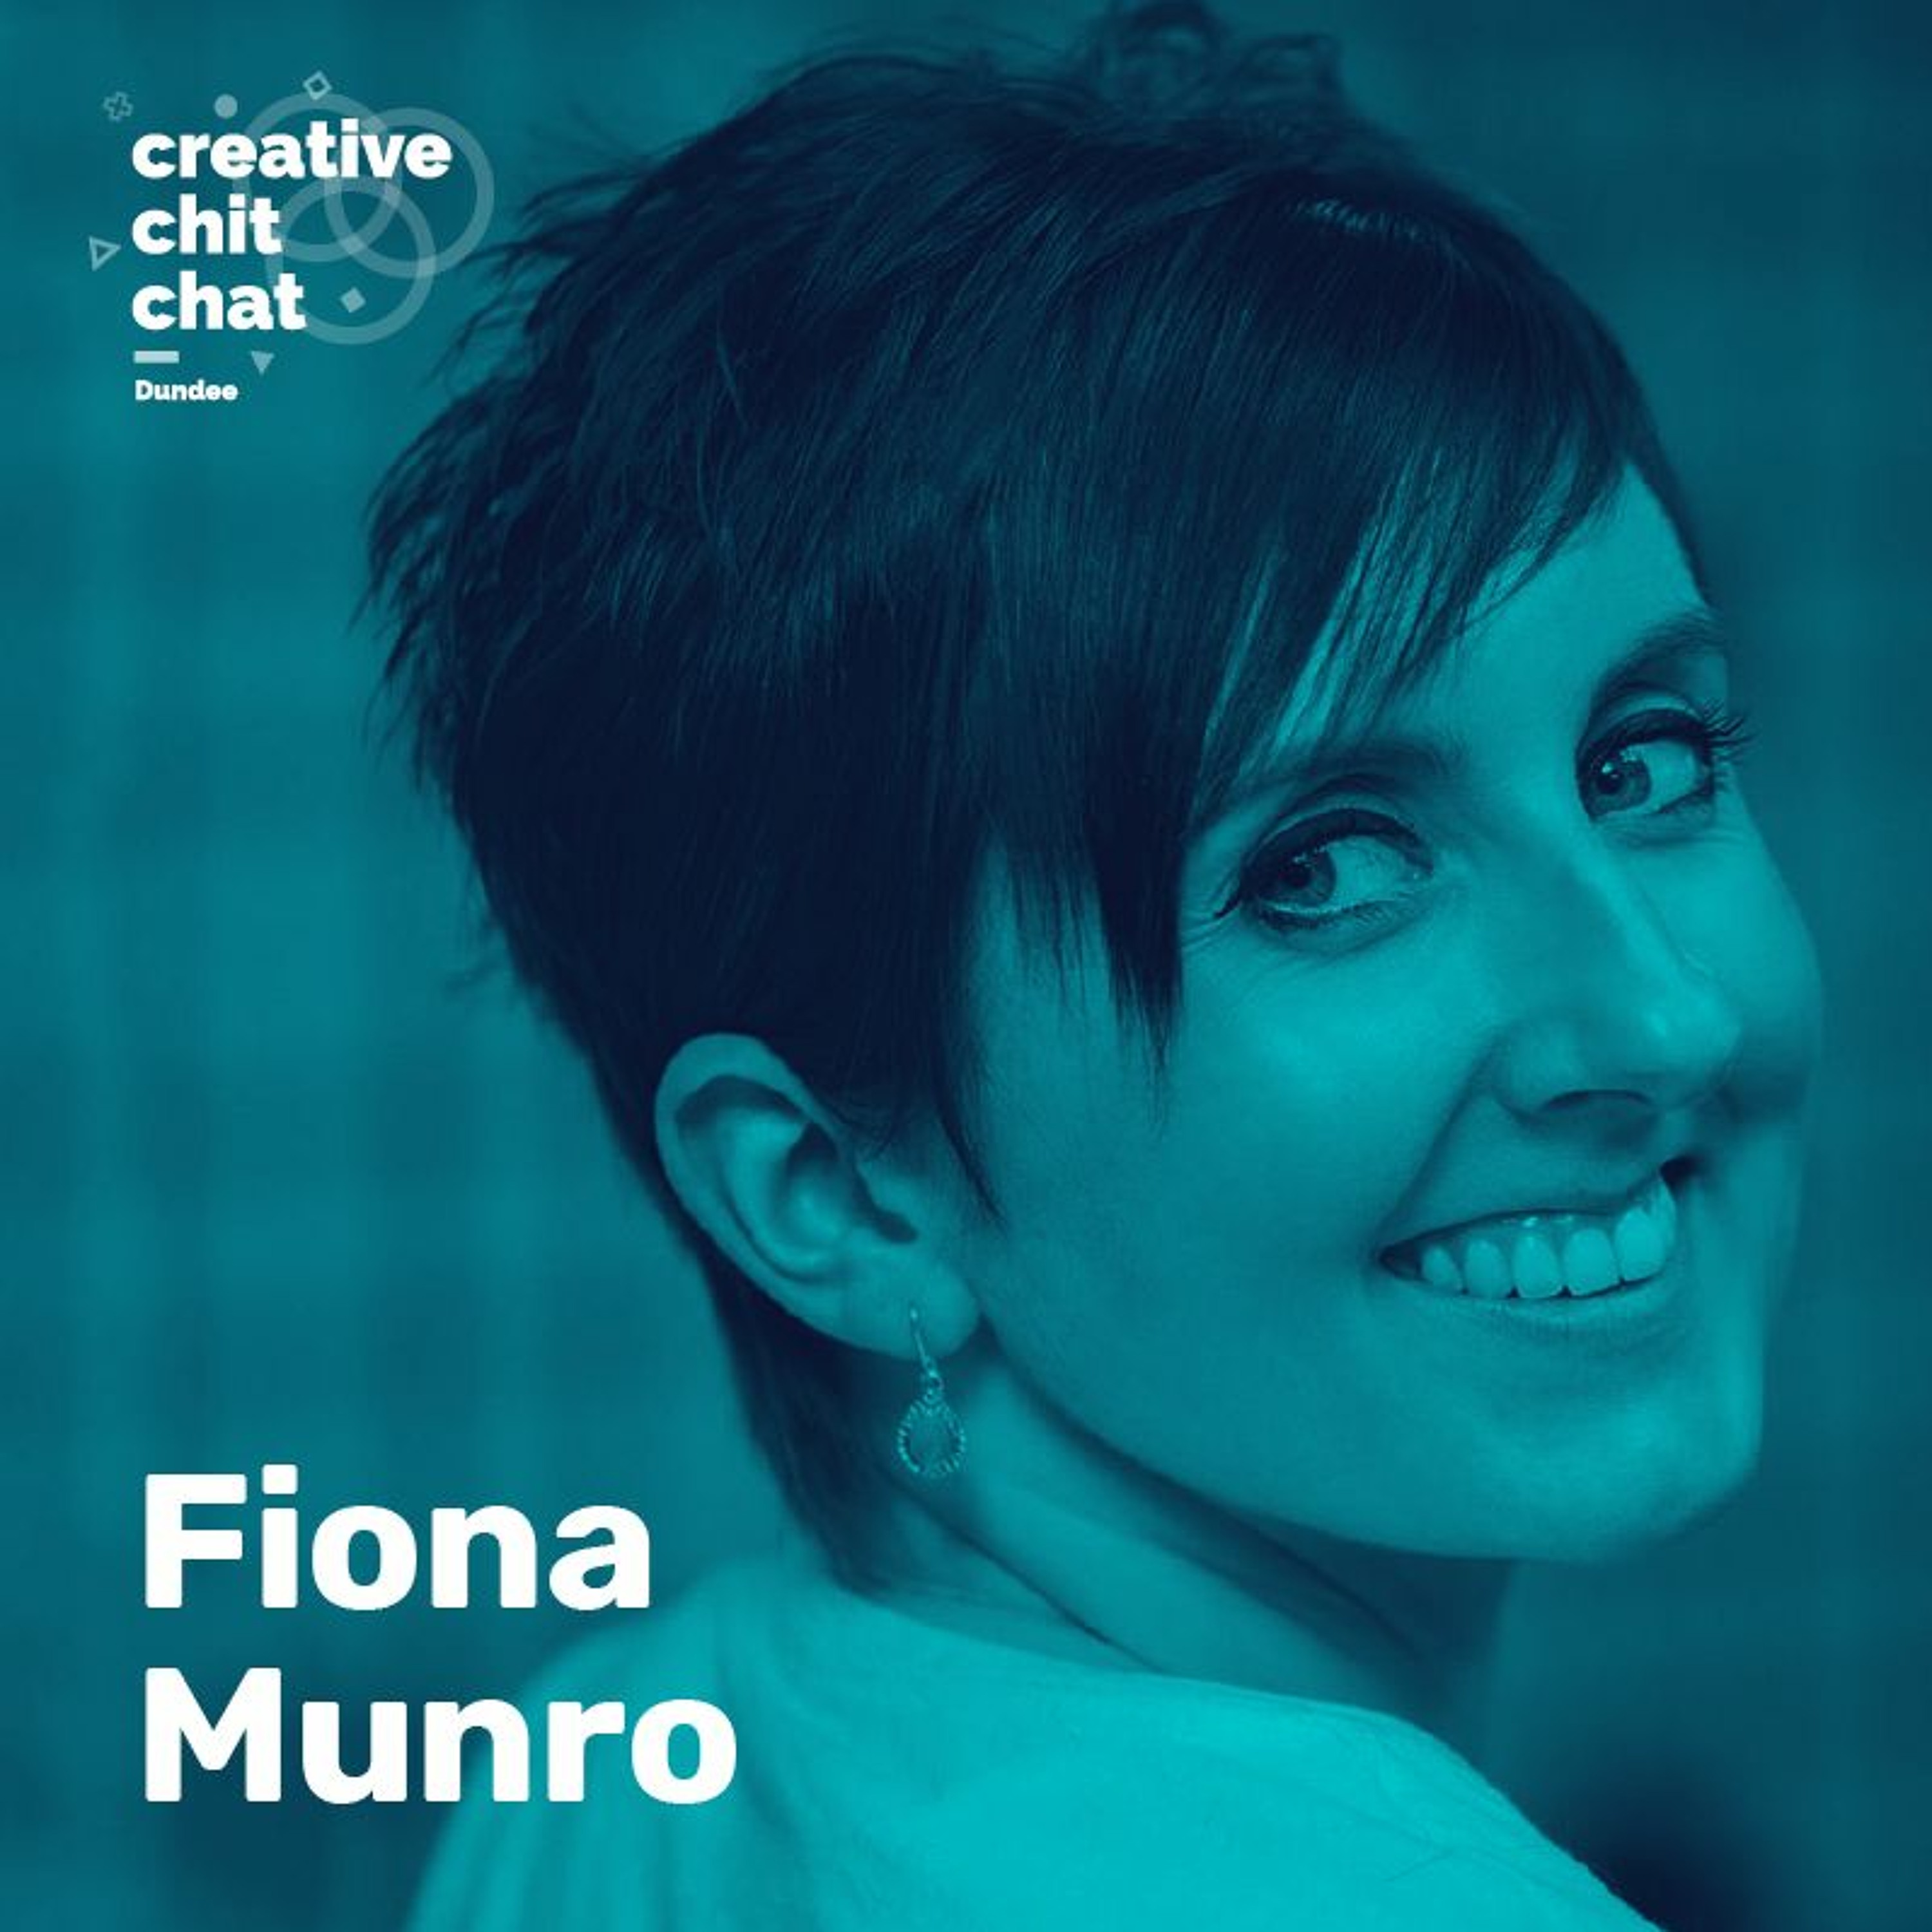 Fiona Munro - Living with cancer and spreading kindness